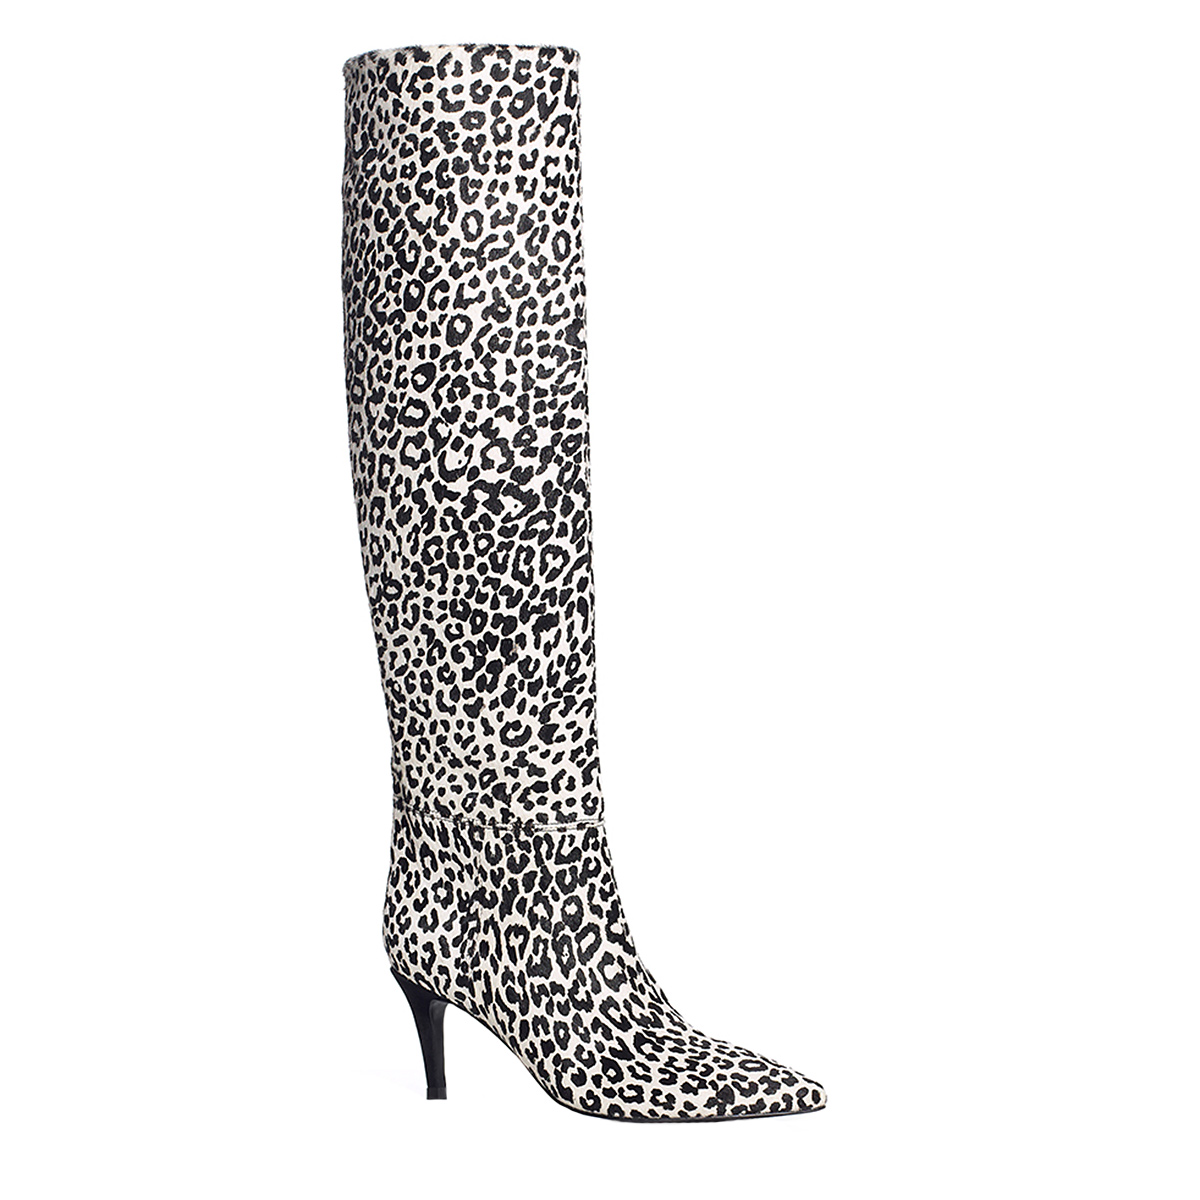 Elizabeth Sulcer x Marc Fisher Boot Collection: Editor's Picks | Us Weekly